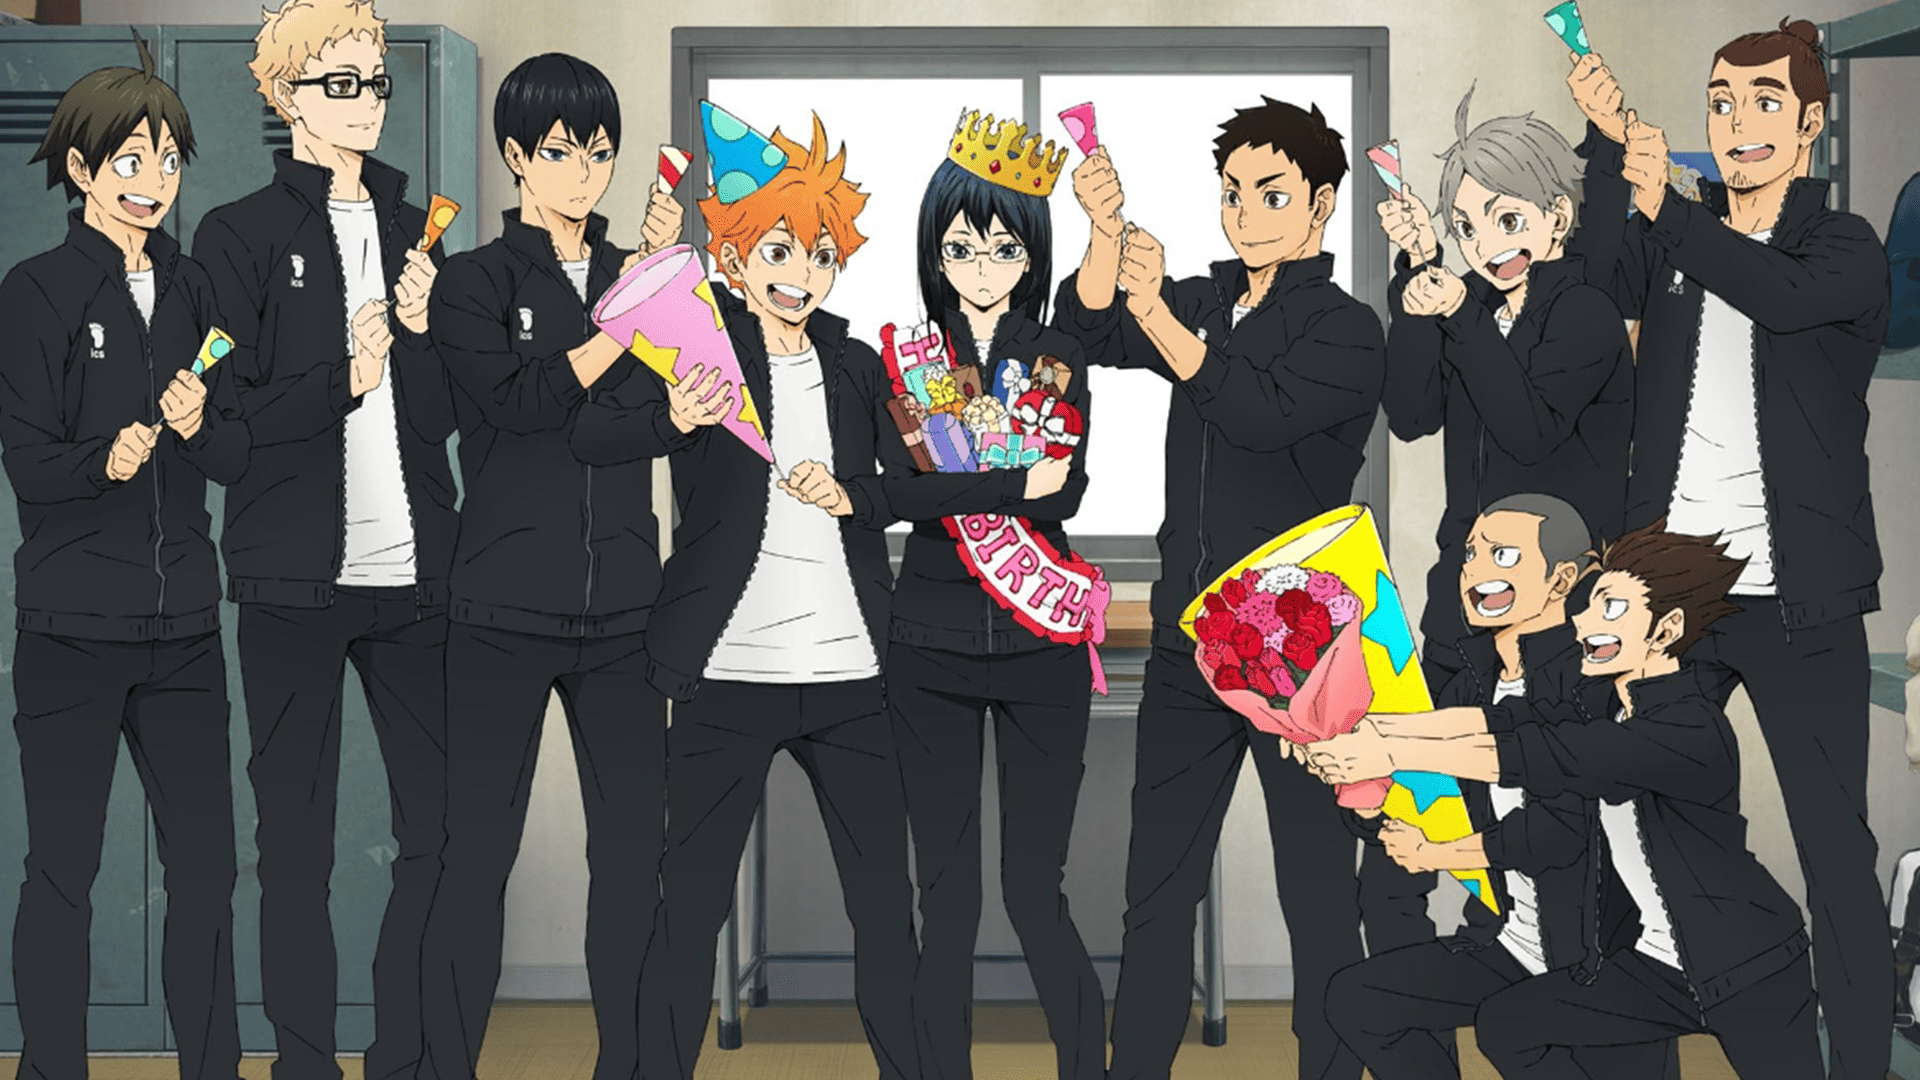 The volleyball team celebrates a birthday together in this image from Production I.G.